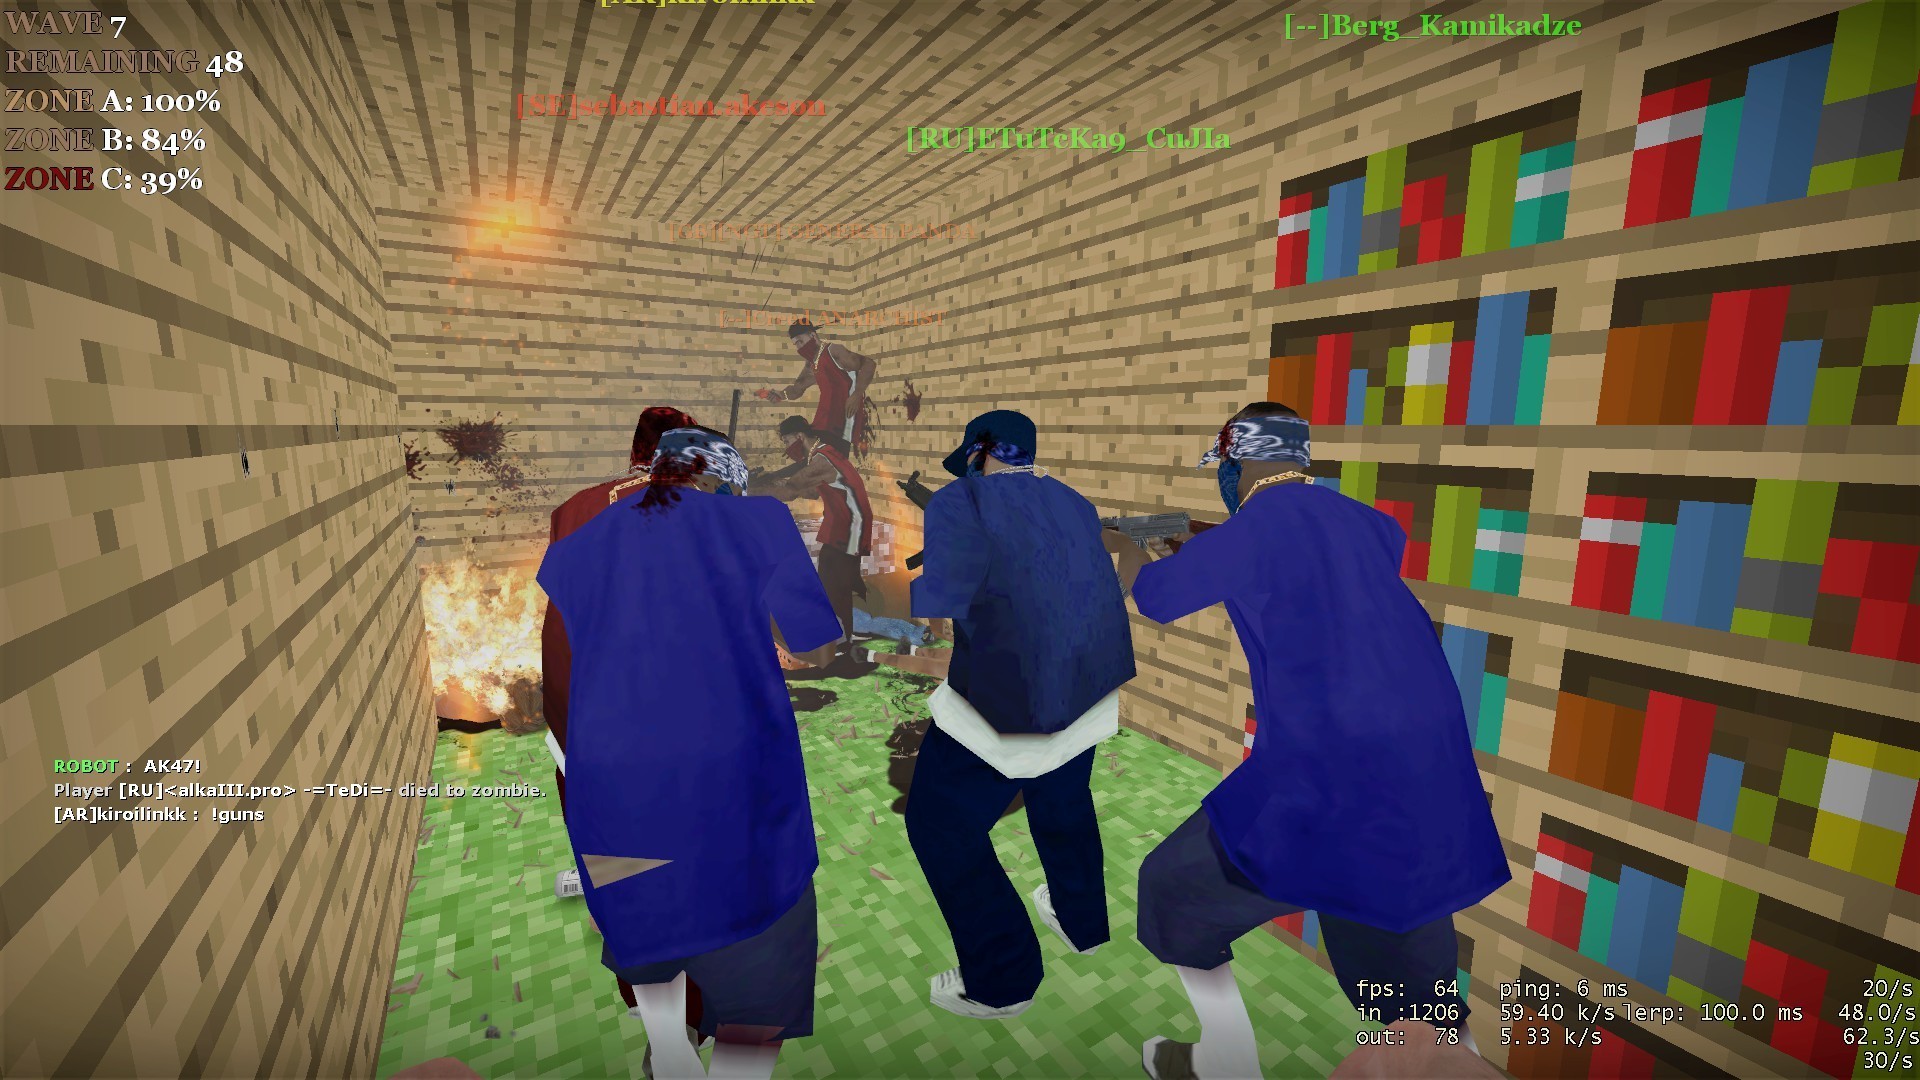 1920x1080 Crips Package Player Models Bloods vs. Crips Package